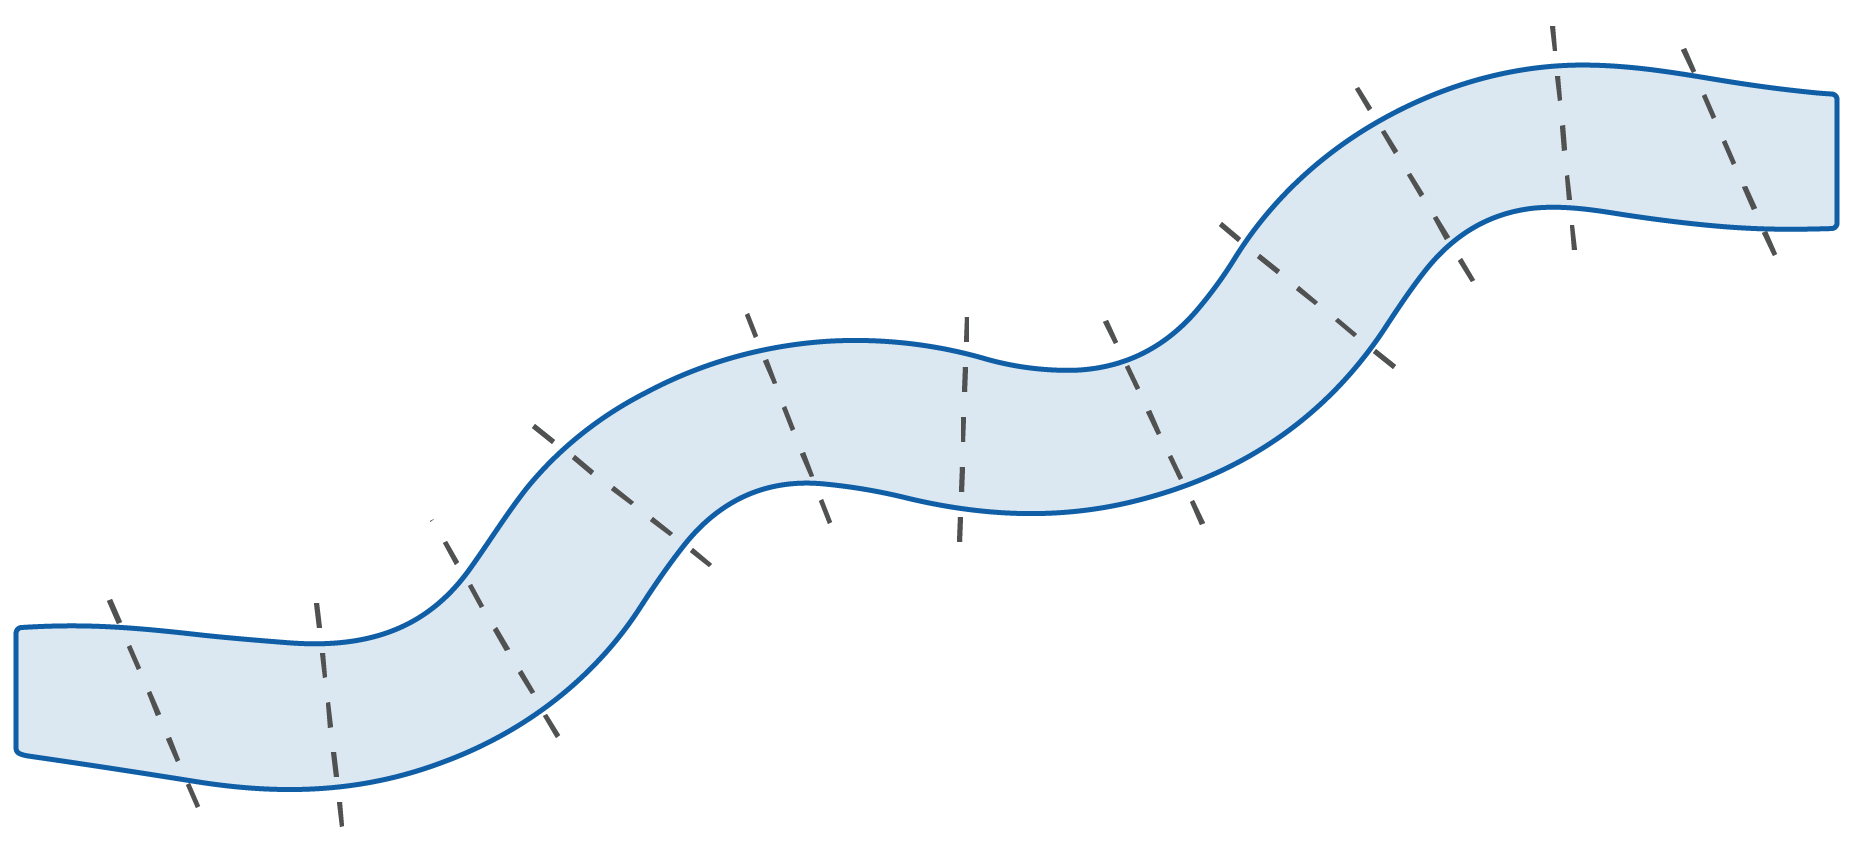 Schematic of stream segment showing 11 evenly spaced transects.”